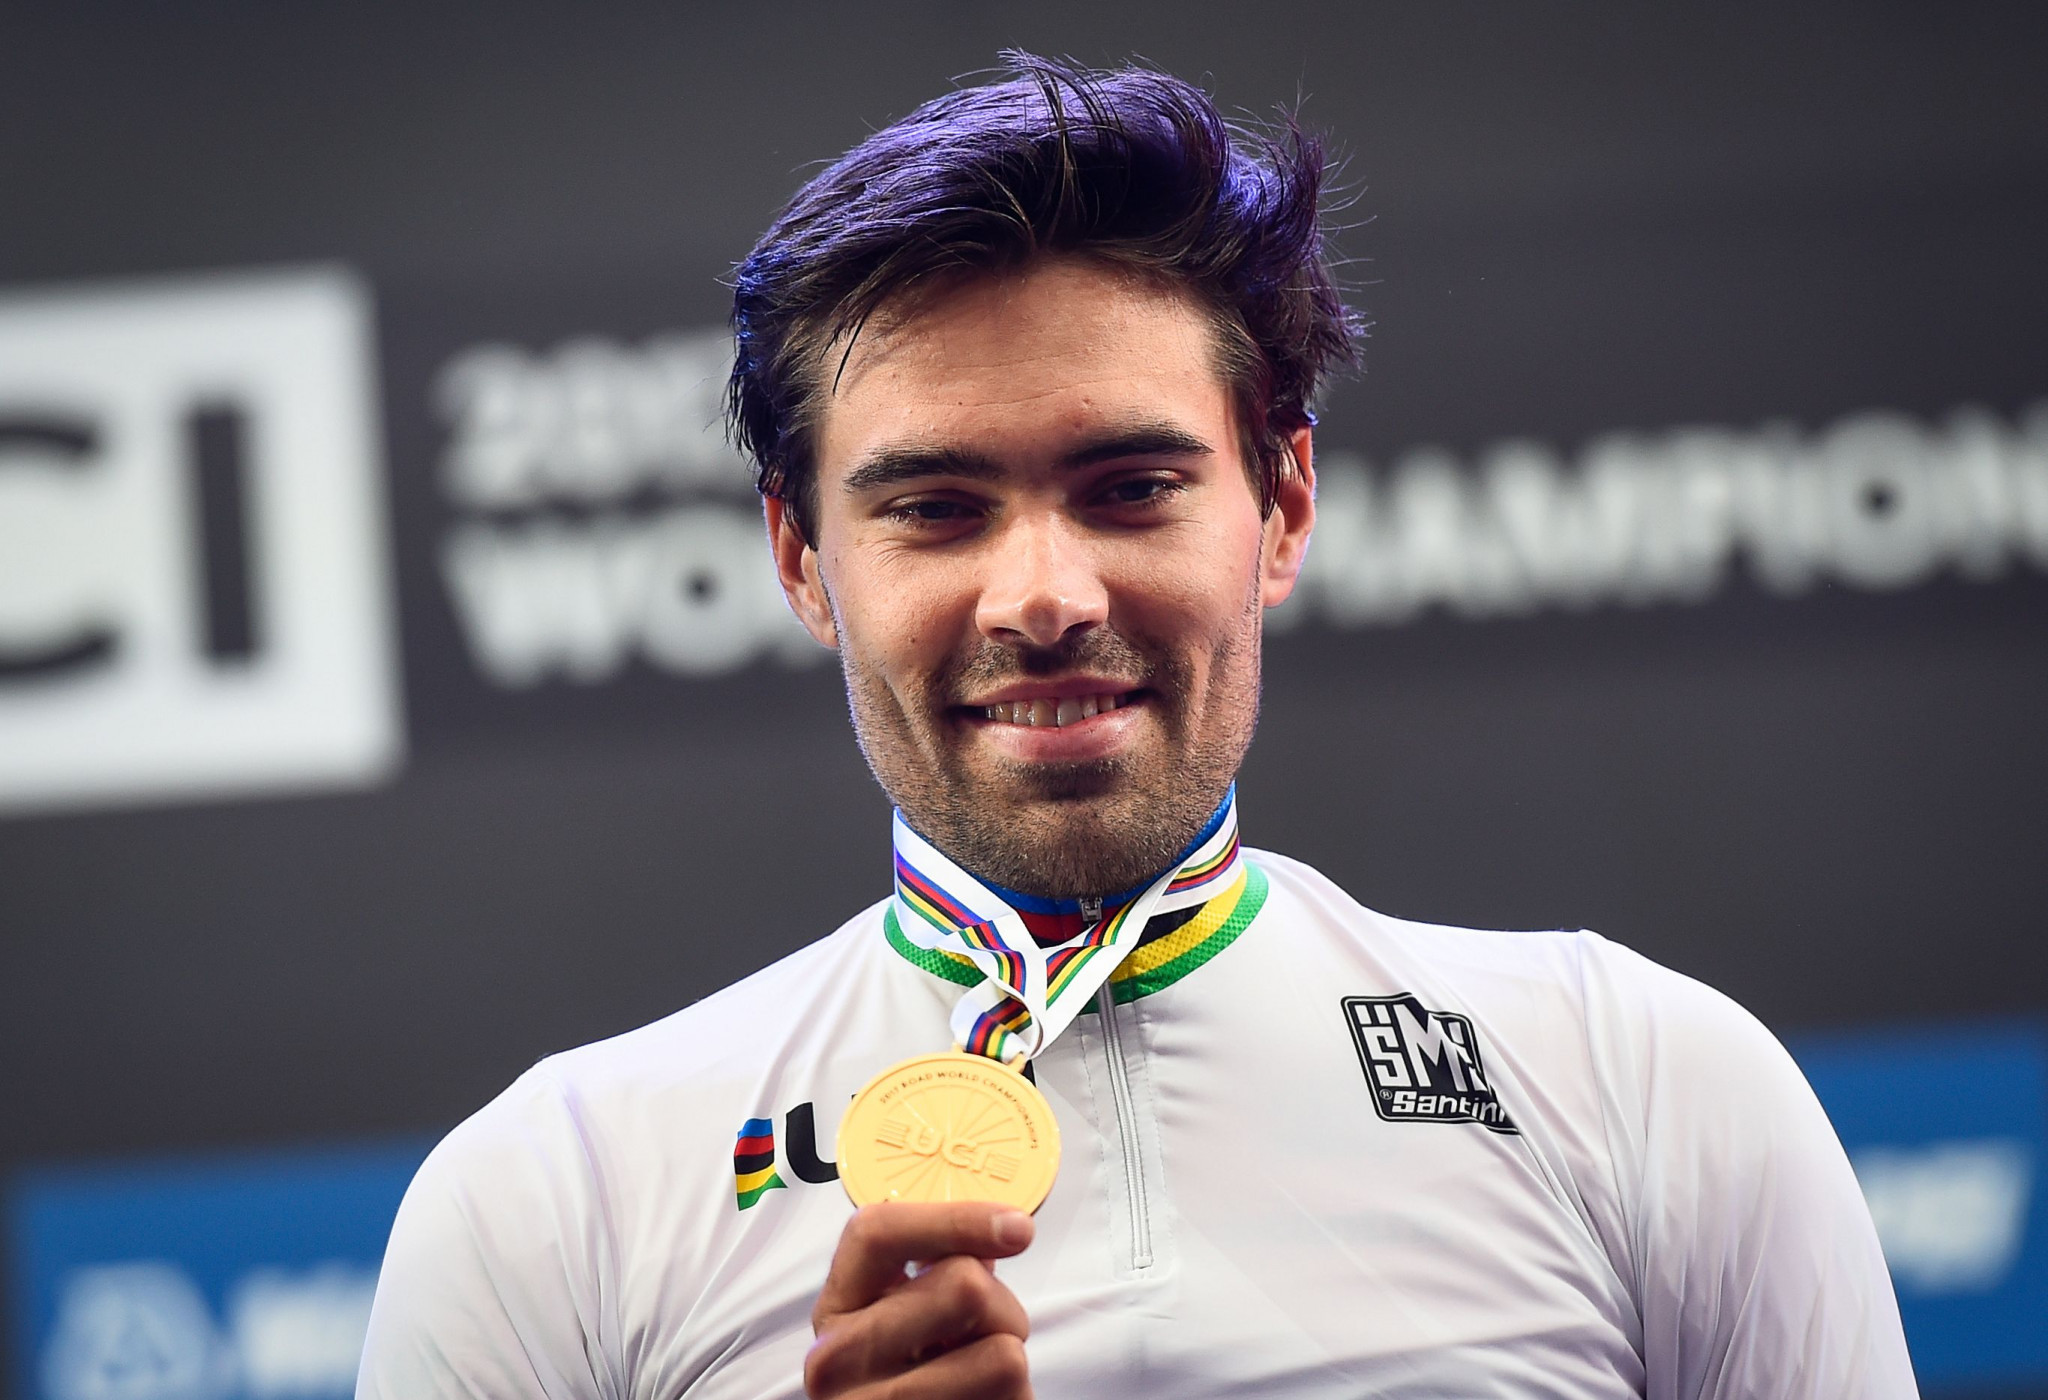 Dumoulin dominates men's individual time trial at UCI Road World Championships